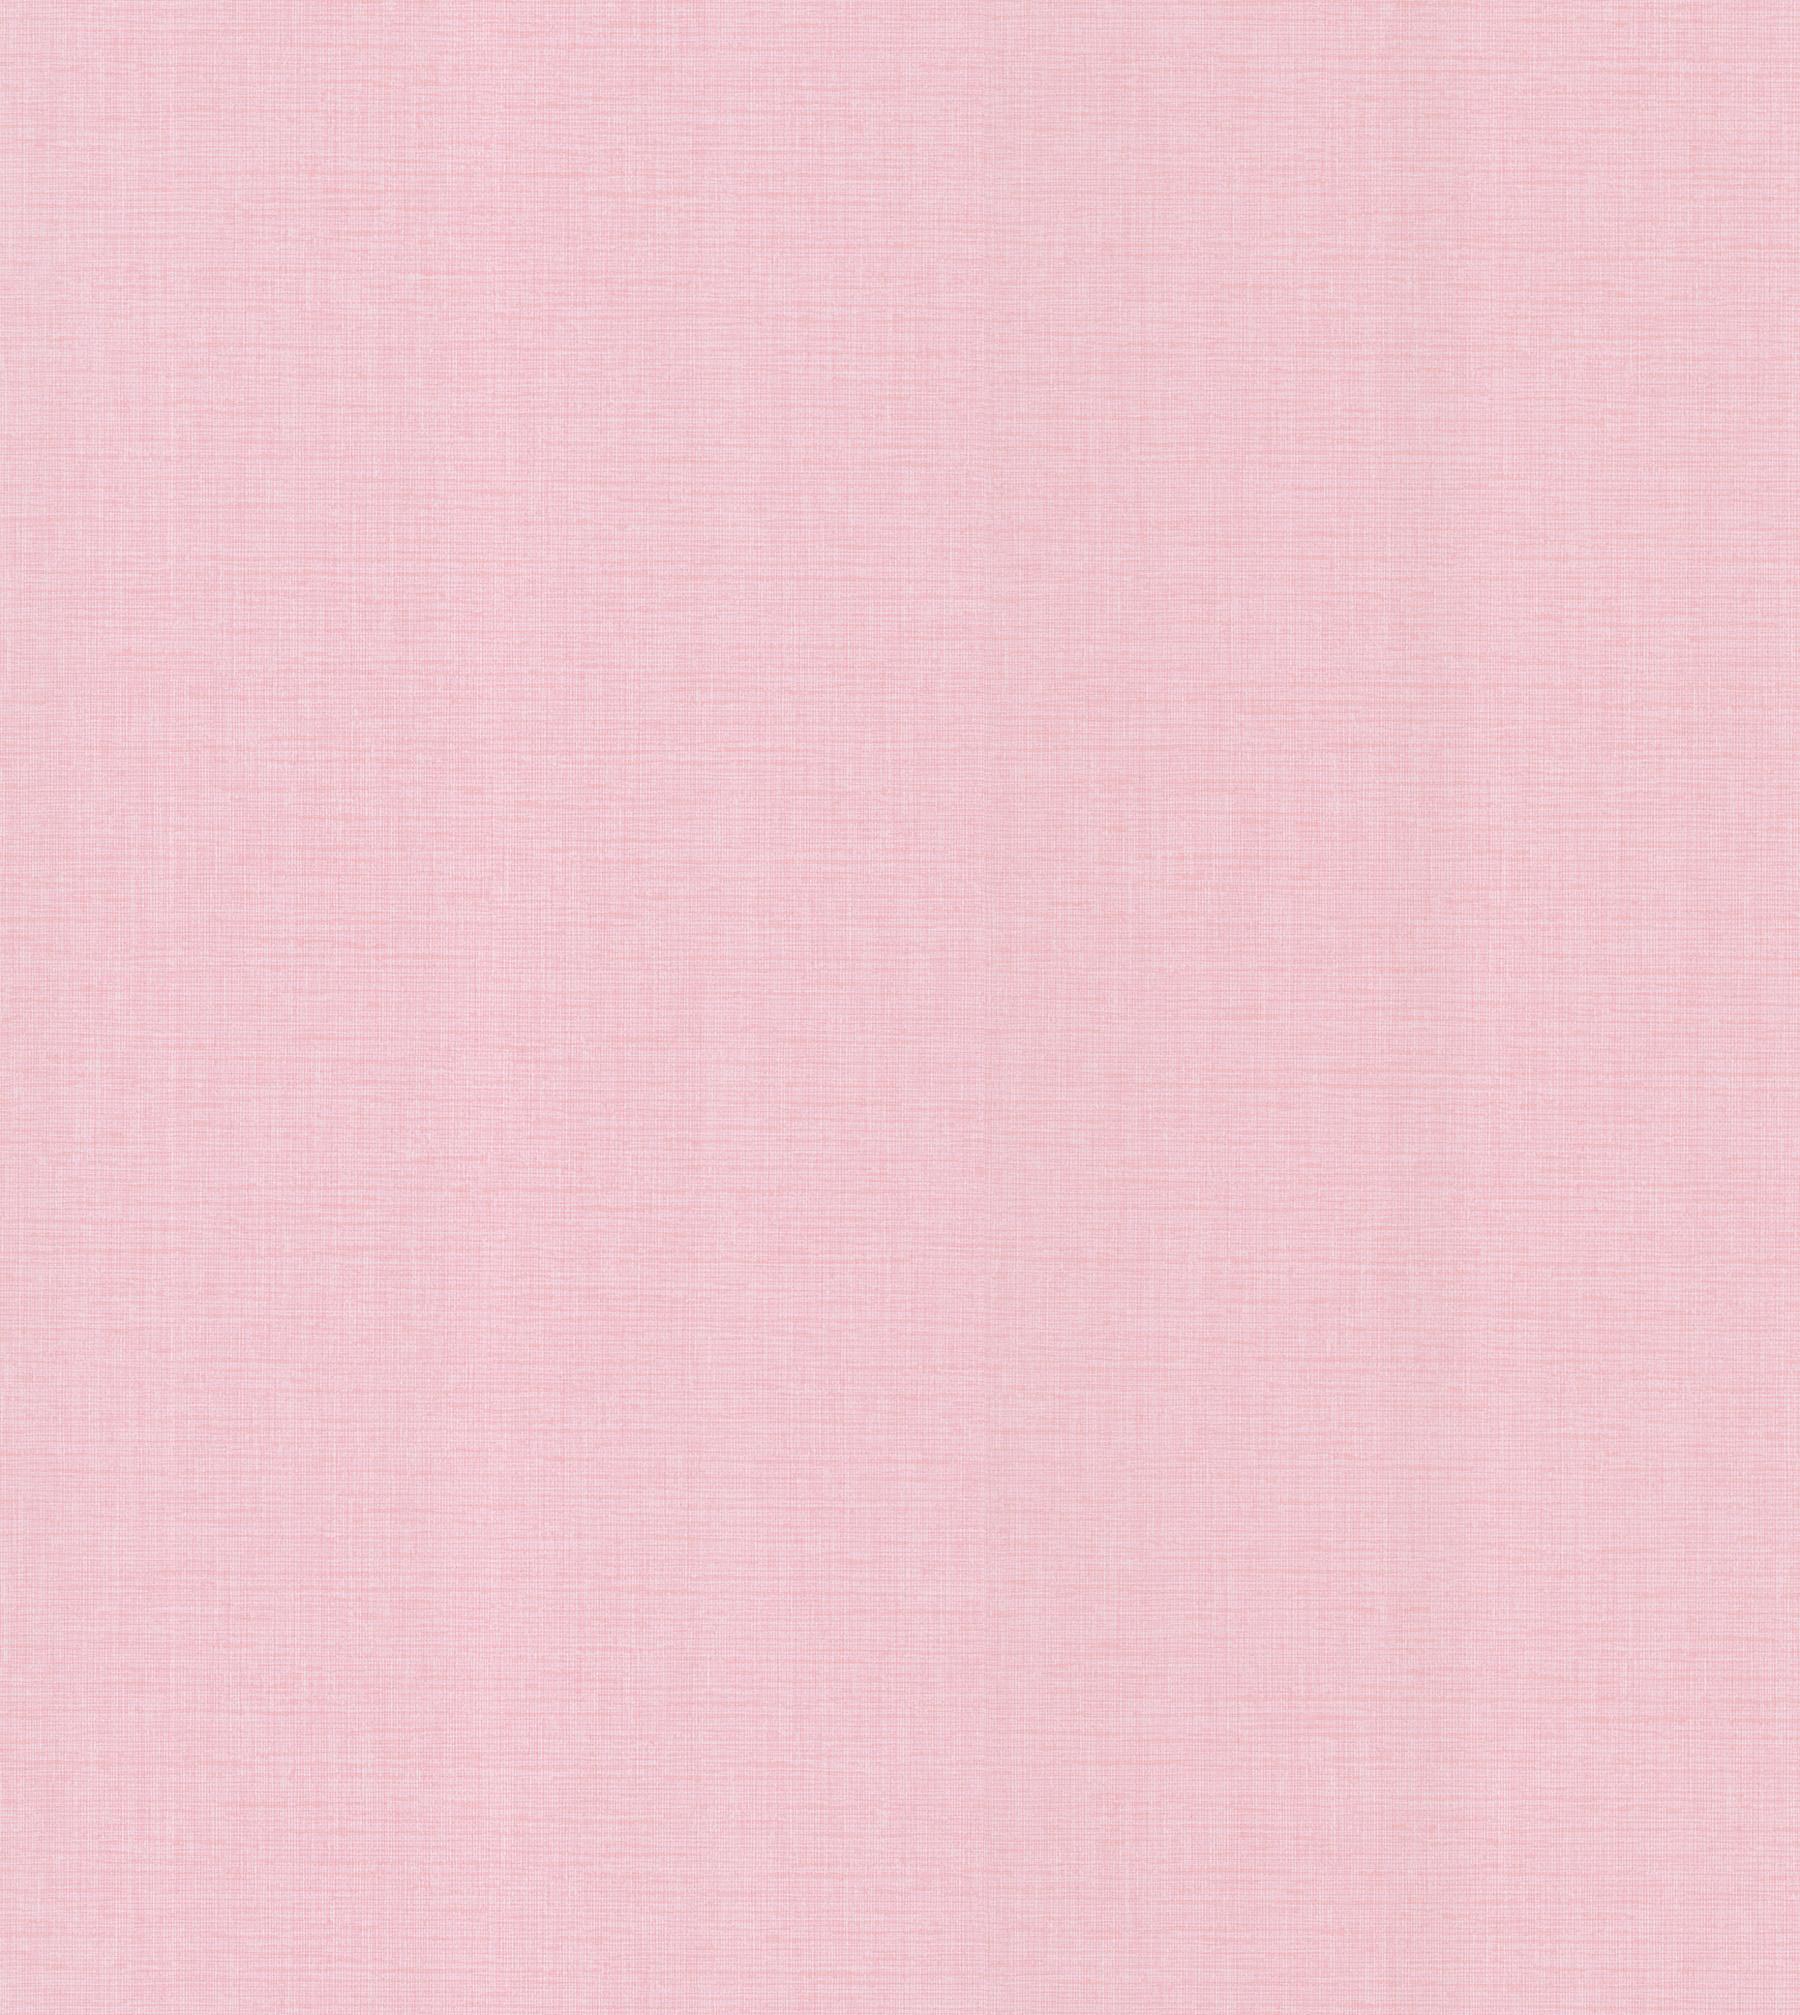 Brewster Wallcovering Lino Pink Fabric Texture Wallpaper